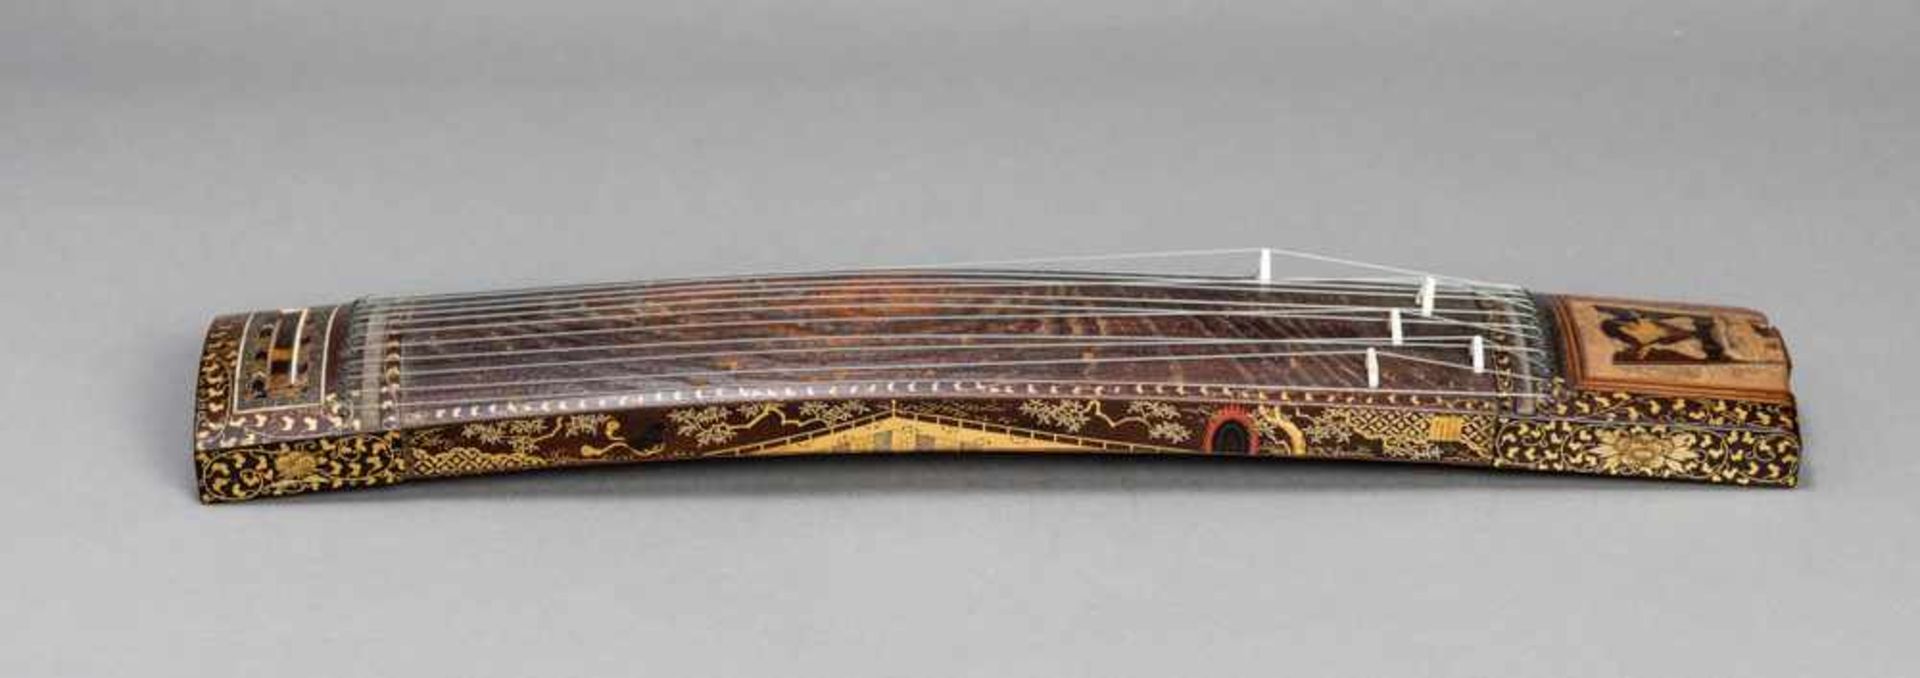 A FINE LACQUERED KOTO Wood, lacquer and bone. Japan, 19th centuryA traditional thirteen-string - Image 3 of 7